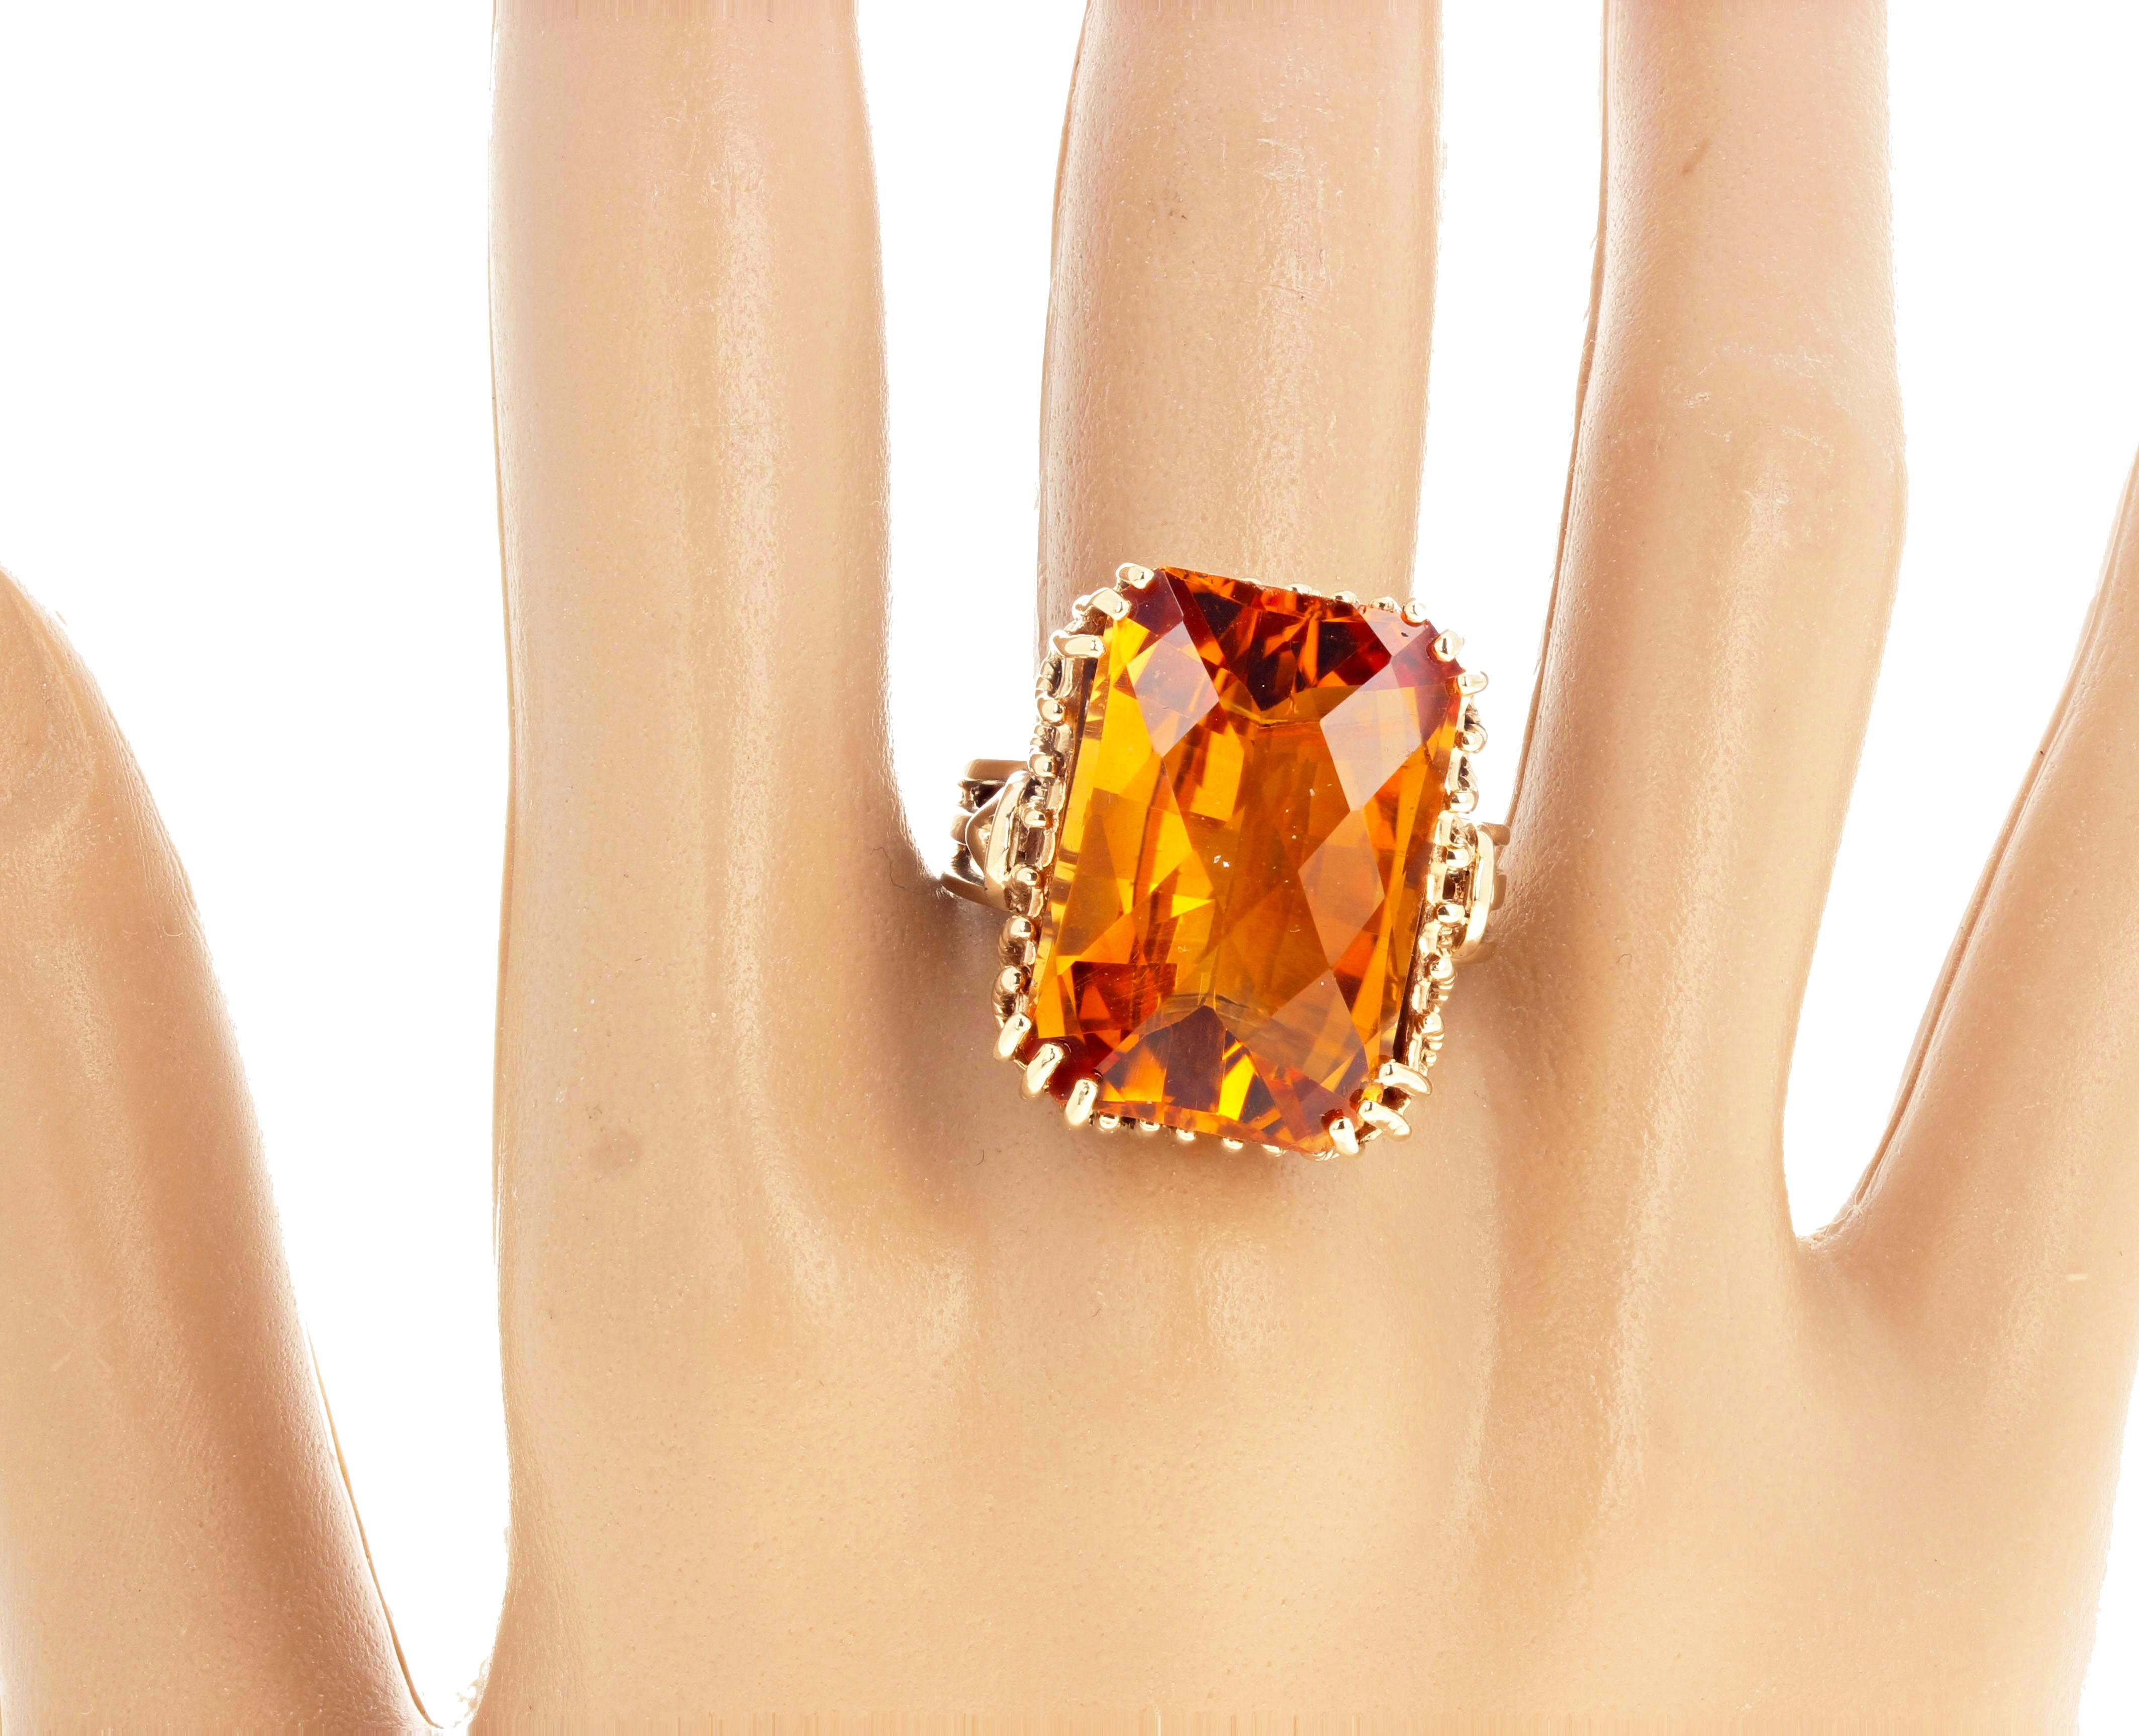 Magnificent checkerboard gem cut glittering natural goldy Citrine set in a 10Kt yellow gold ring size 9 (sizable for free).  It measures 21 mm x 14 mm and is a lovely 16.86 carat cushion cut .   If you wish faster delivery on your purchase choose